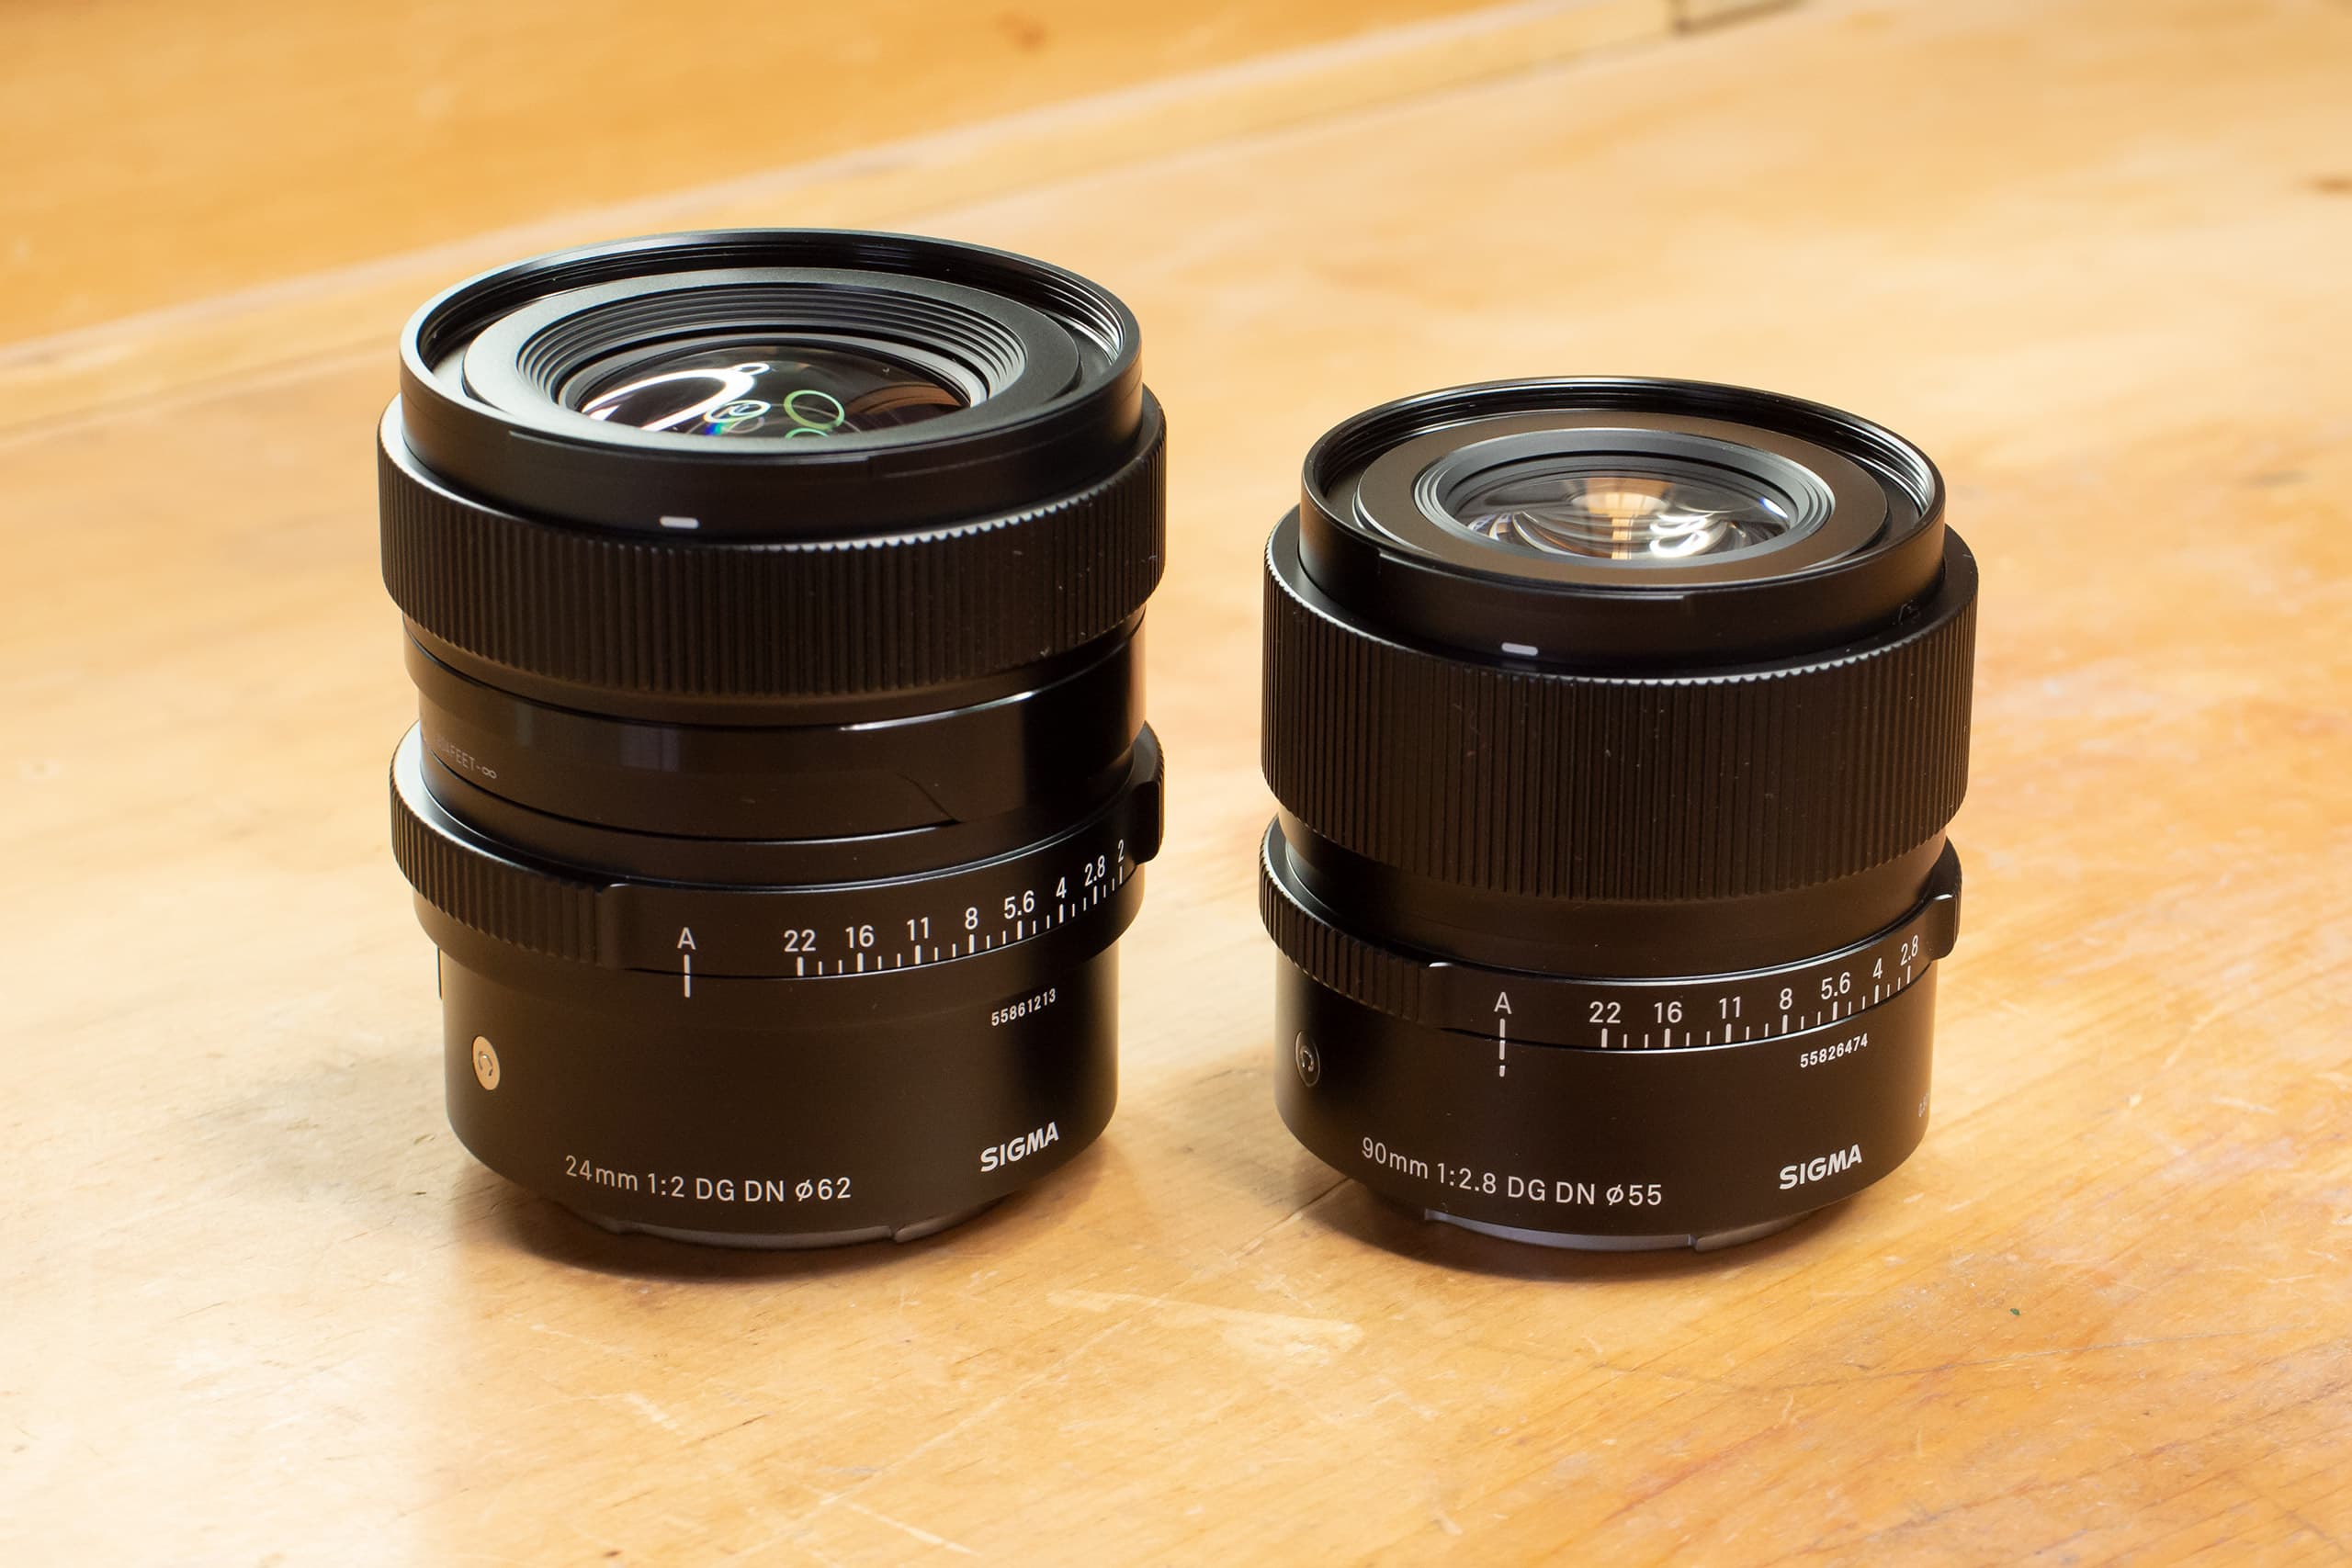 The Sigma 24mm f2 DG DN lens is compact, but not as compact as the 90mm f2.8 DG DN.